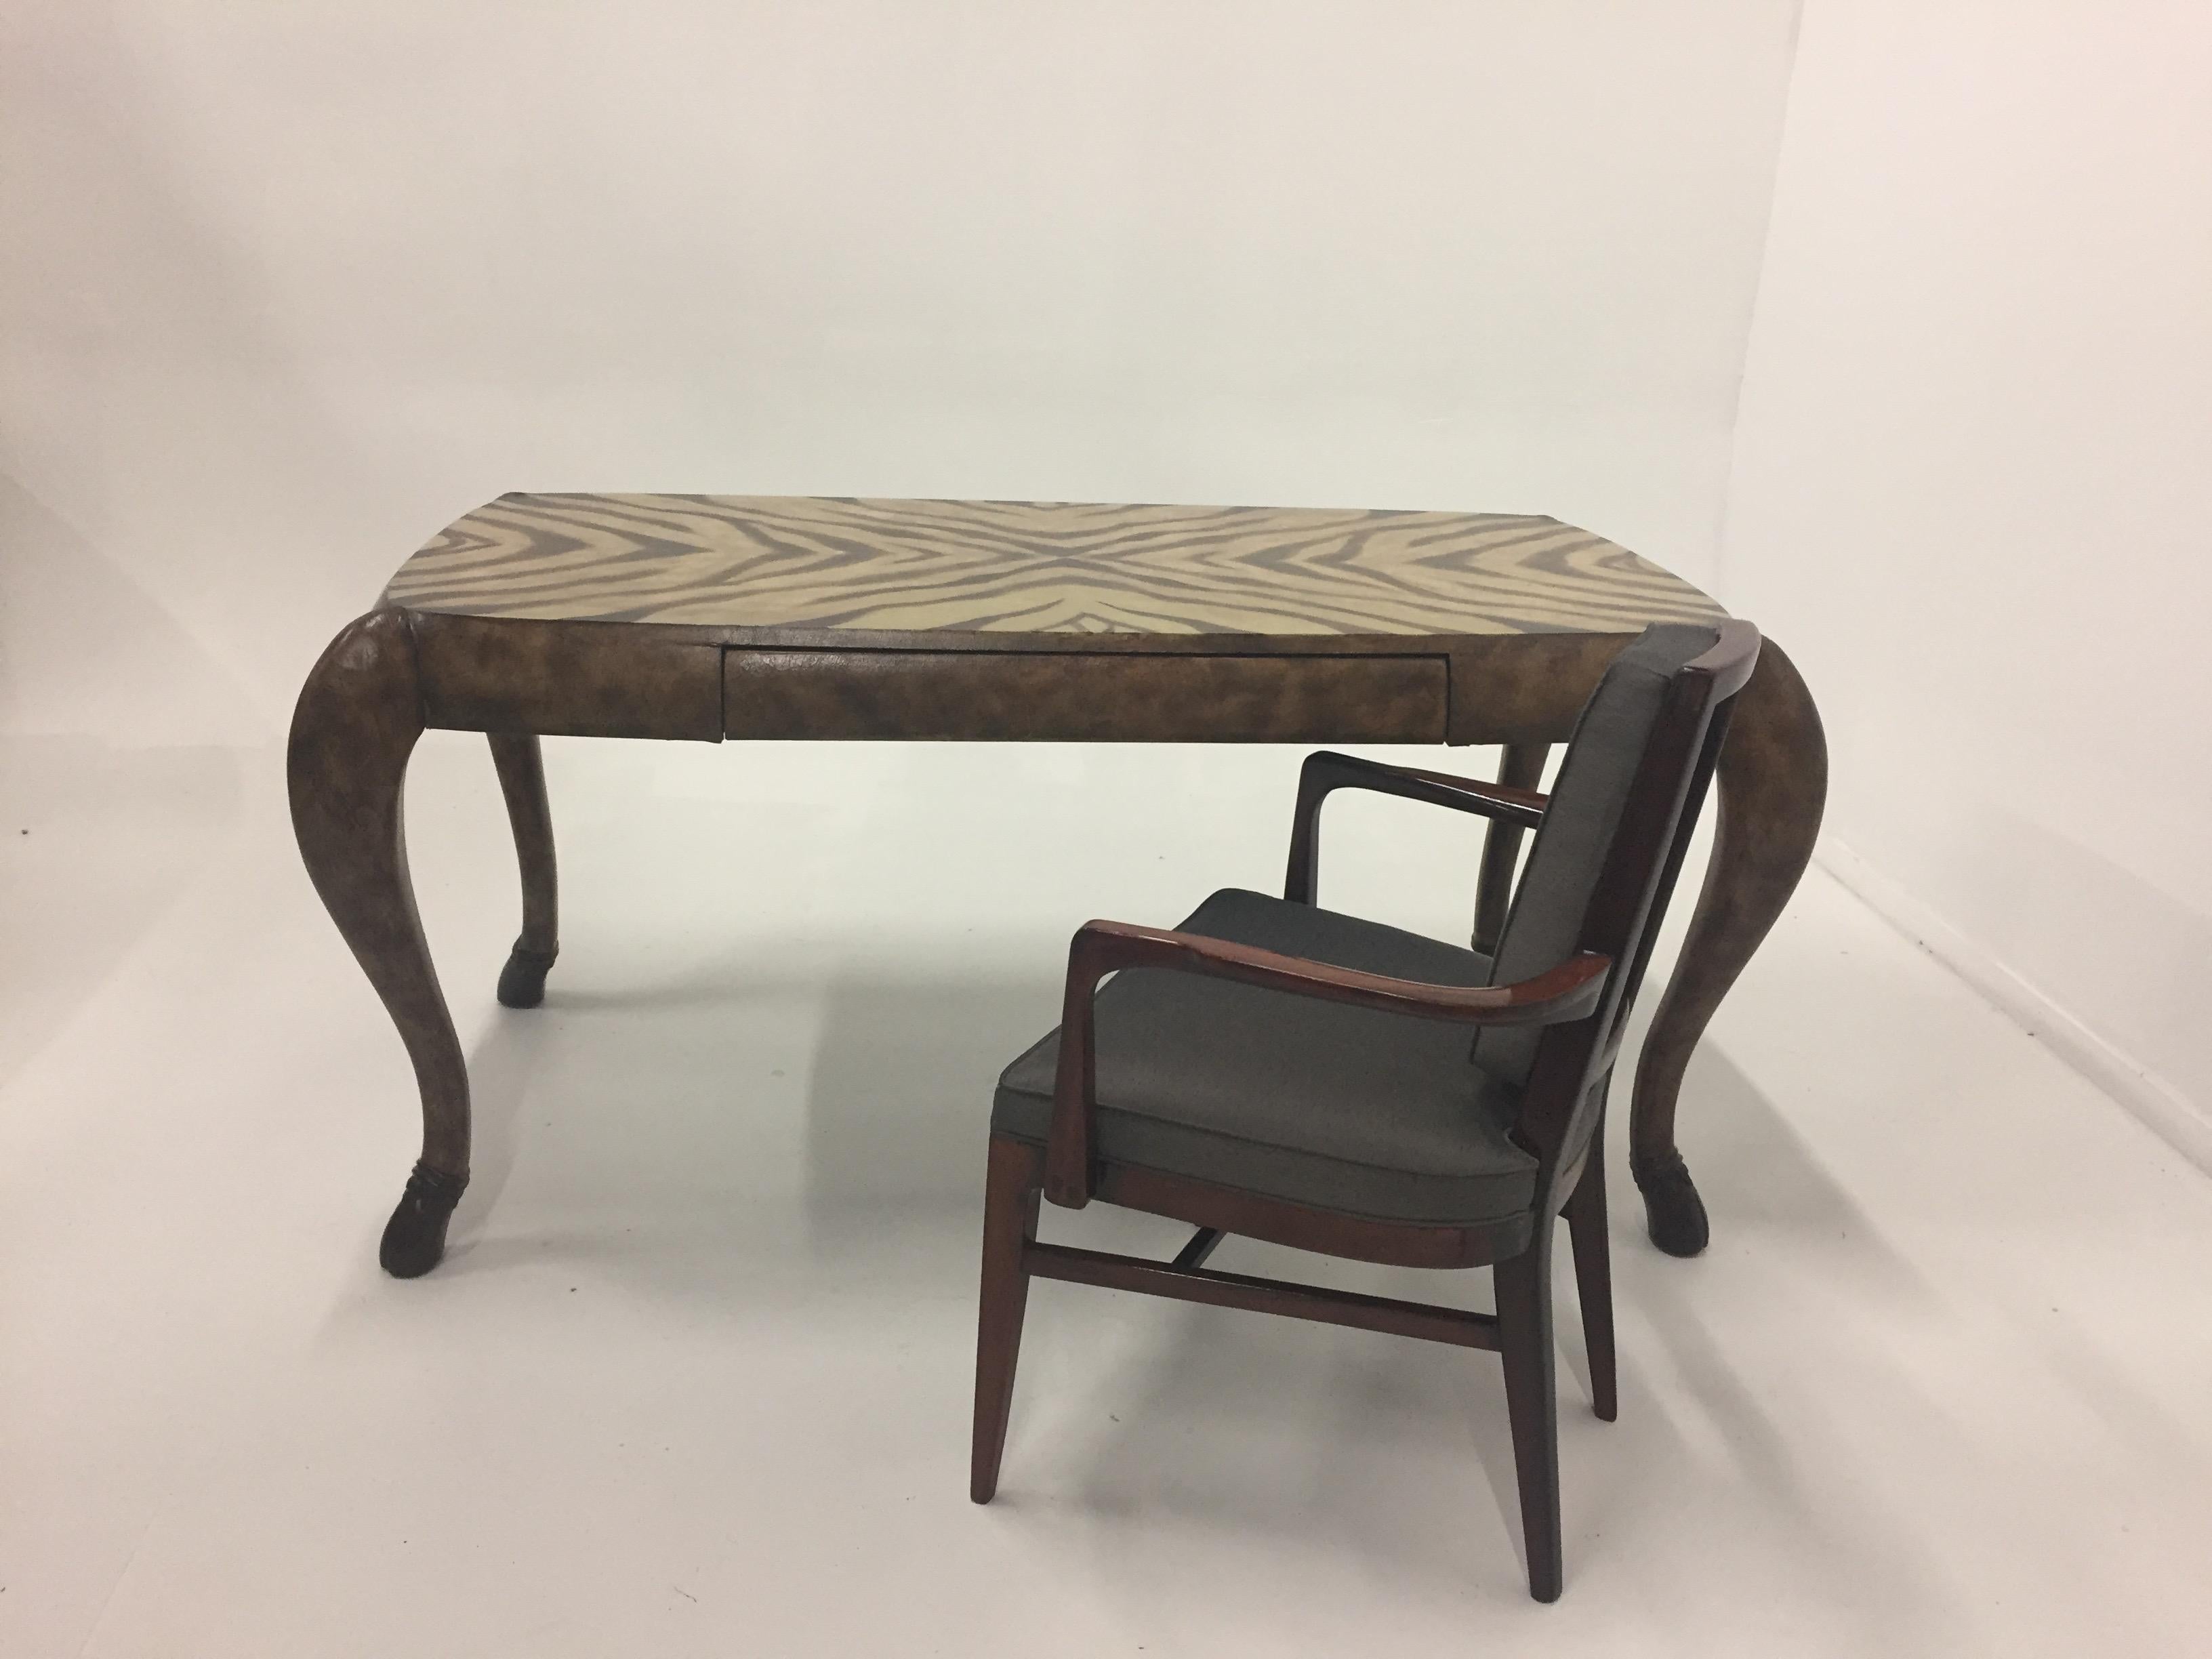 Unbelievably chic writing desk that's wrapped in rich brown leather and has a zebra motif pattern on the top. Beautifully crafted by Maitland Smith, the desk has a single drawer and handsome hoof shaped feet that are ebonized wood at very